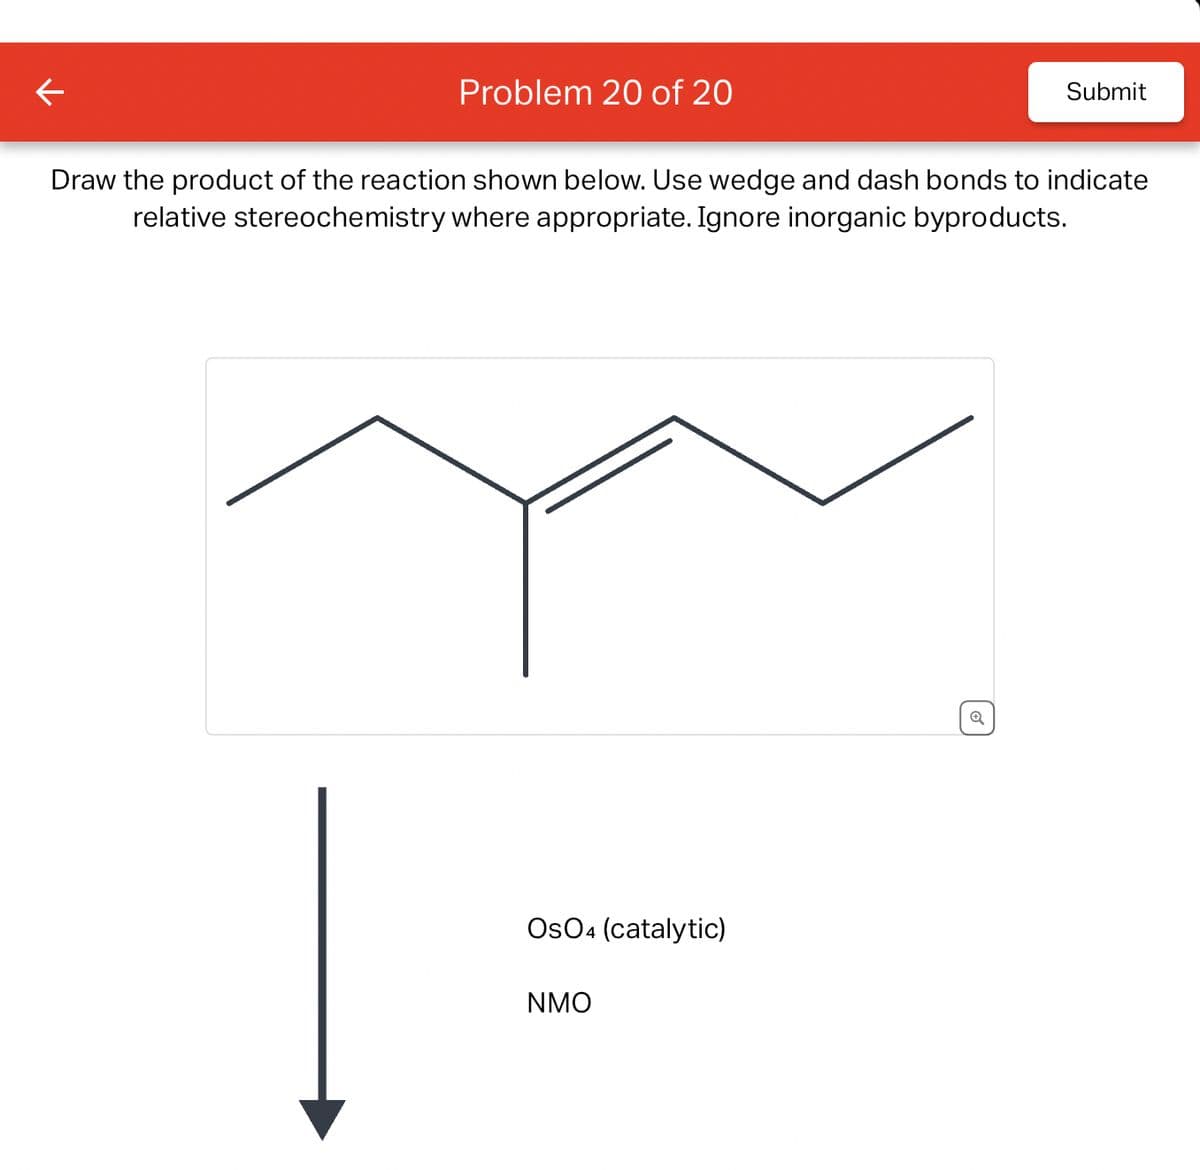 Problem 20 of 20
Draw the product of the reaction shown below. Use wedge and dash bonds to indicate
relative stereochemistry where appropriate. Ignore inorganic byproducts.
OsO4 (catalytic)
NMO
Submit
o